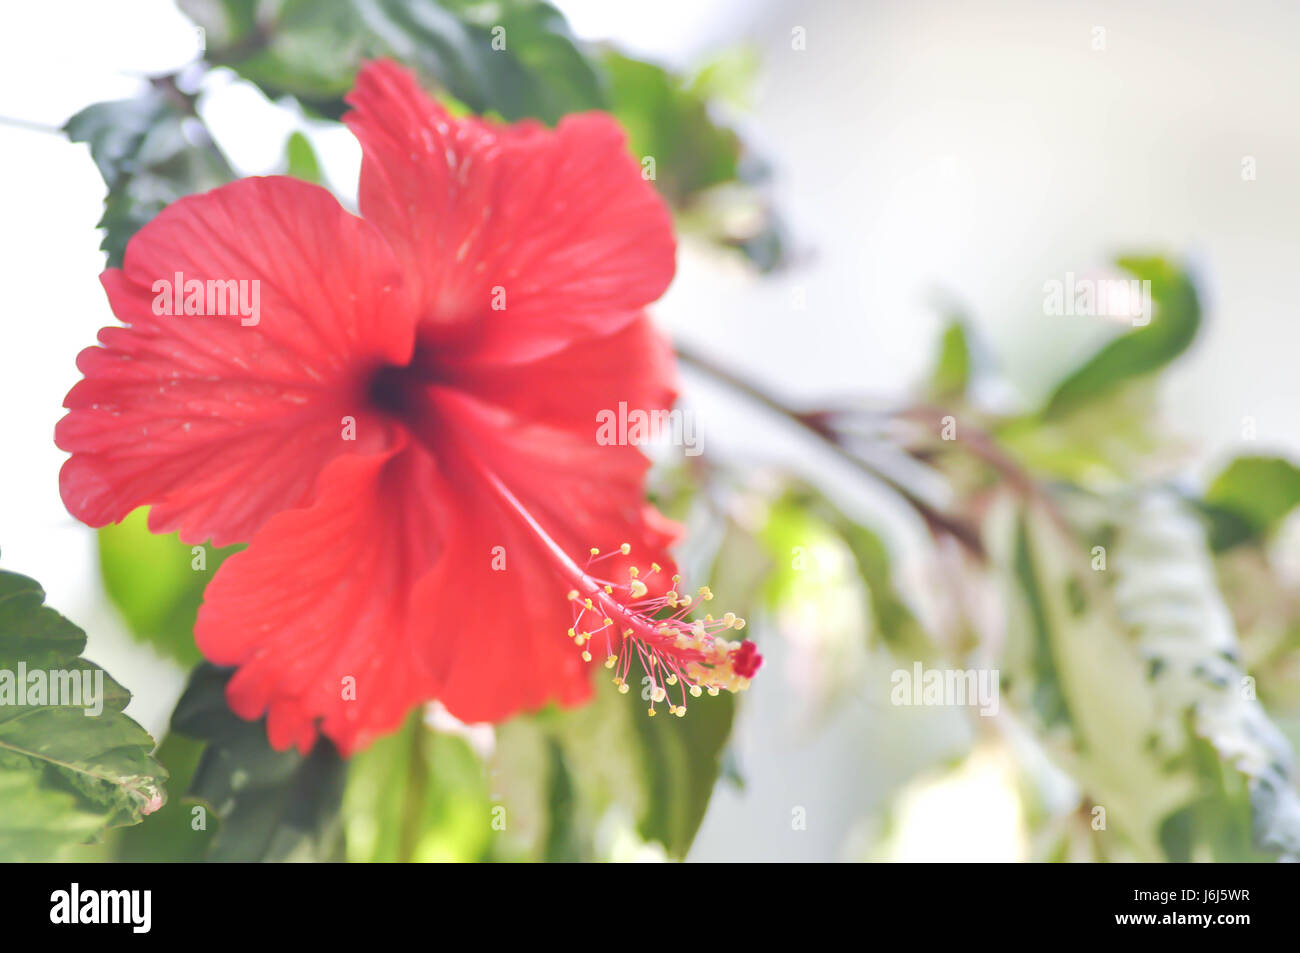 shoe flower,Chinese rose or Hibiscus Stock Photo